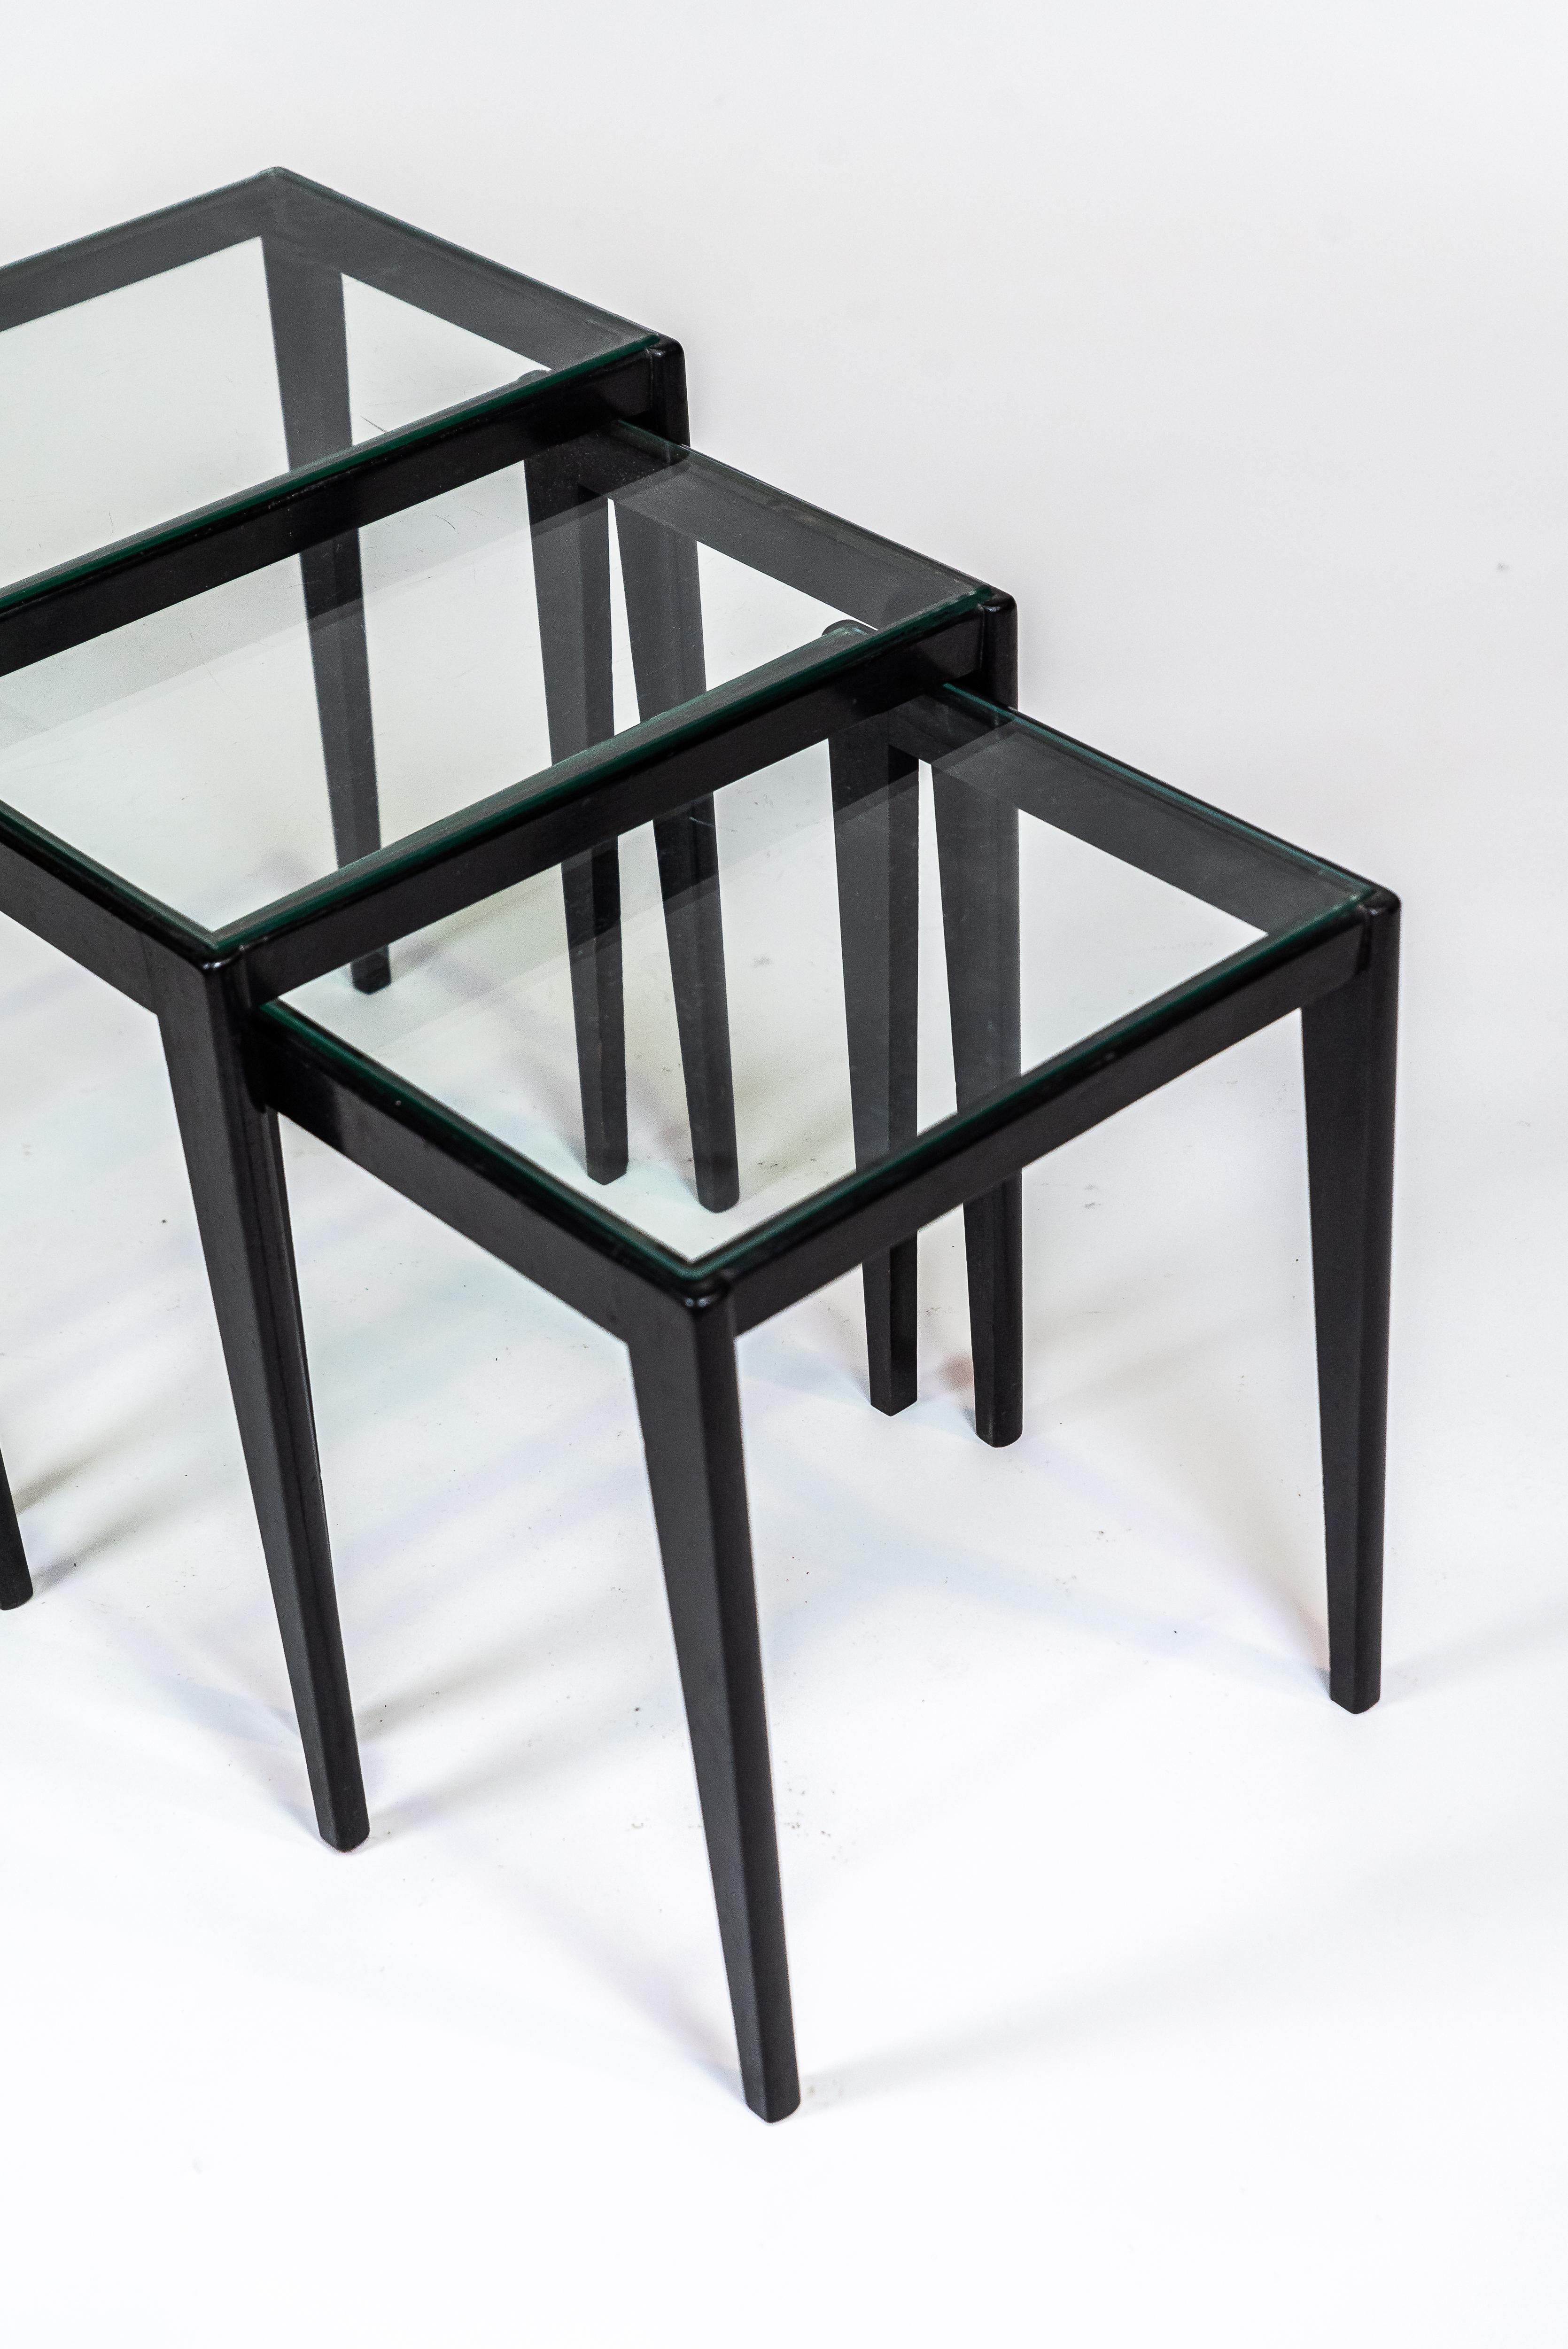 20th Century Giuseppe Scapinelli, Nesting Tables, 1960 For Sale